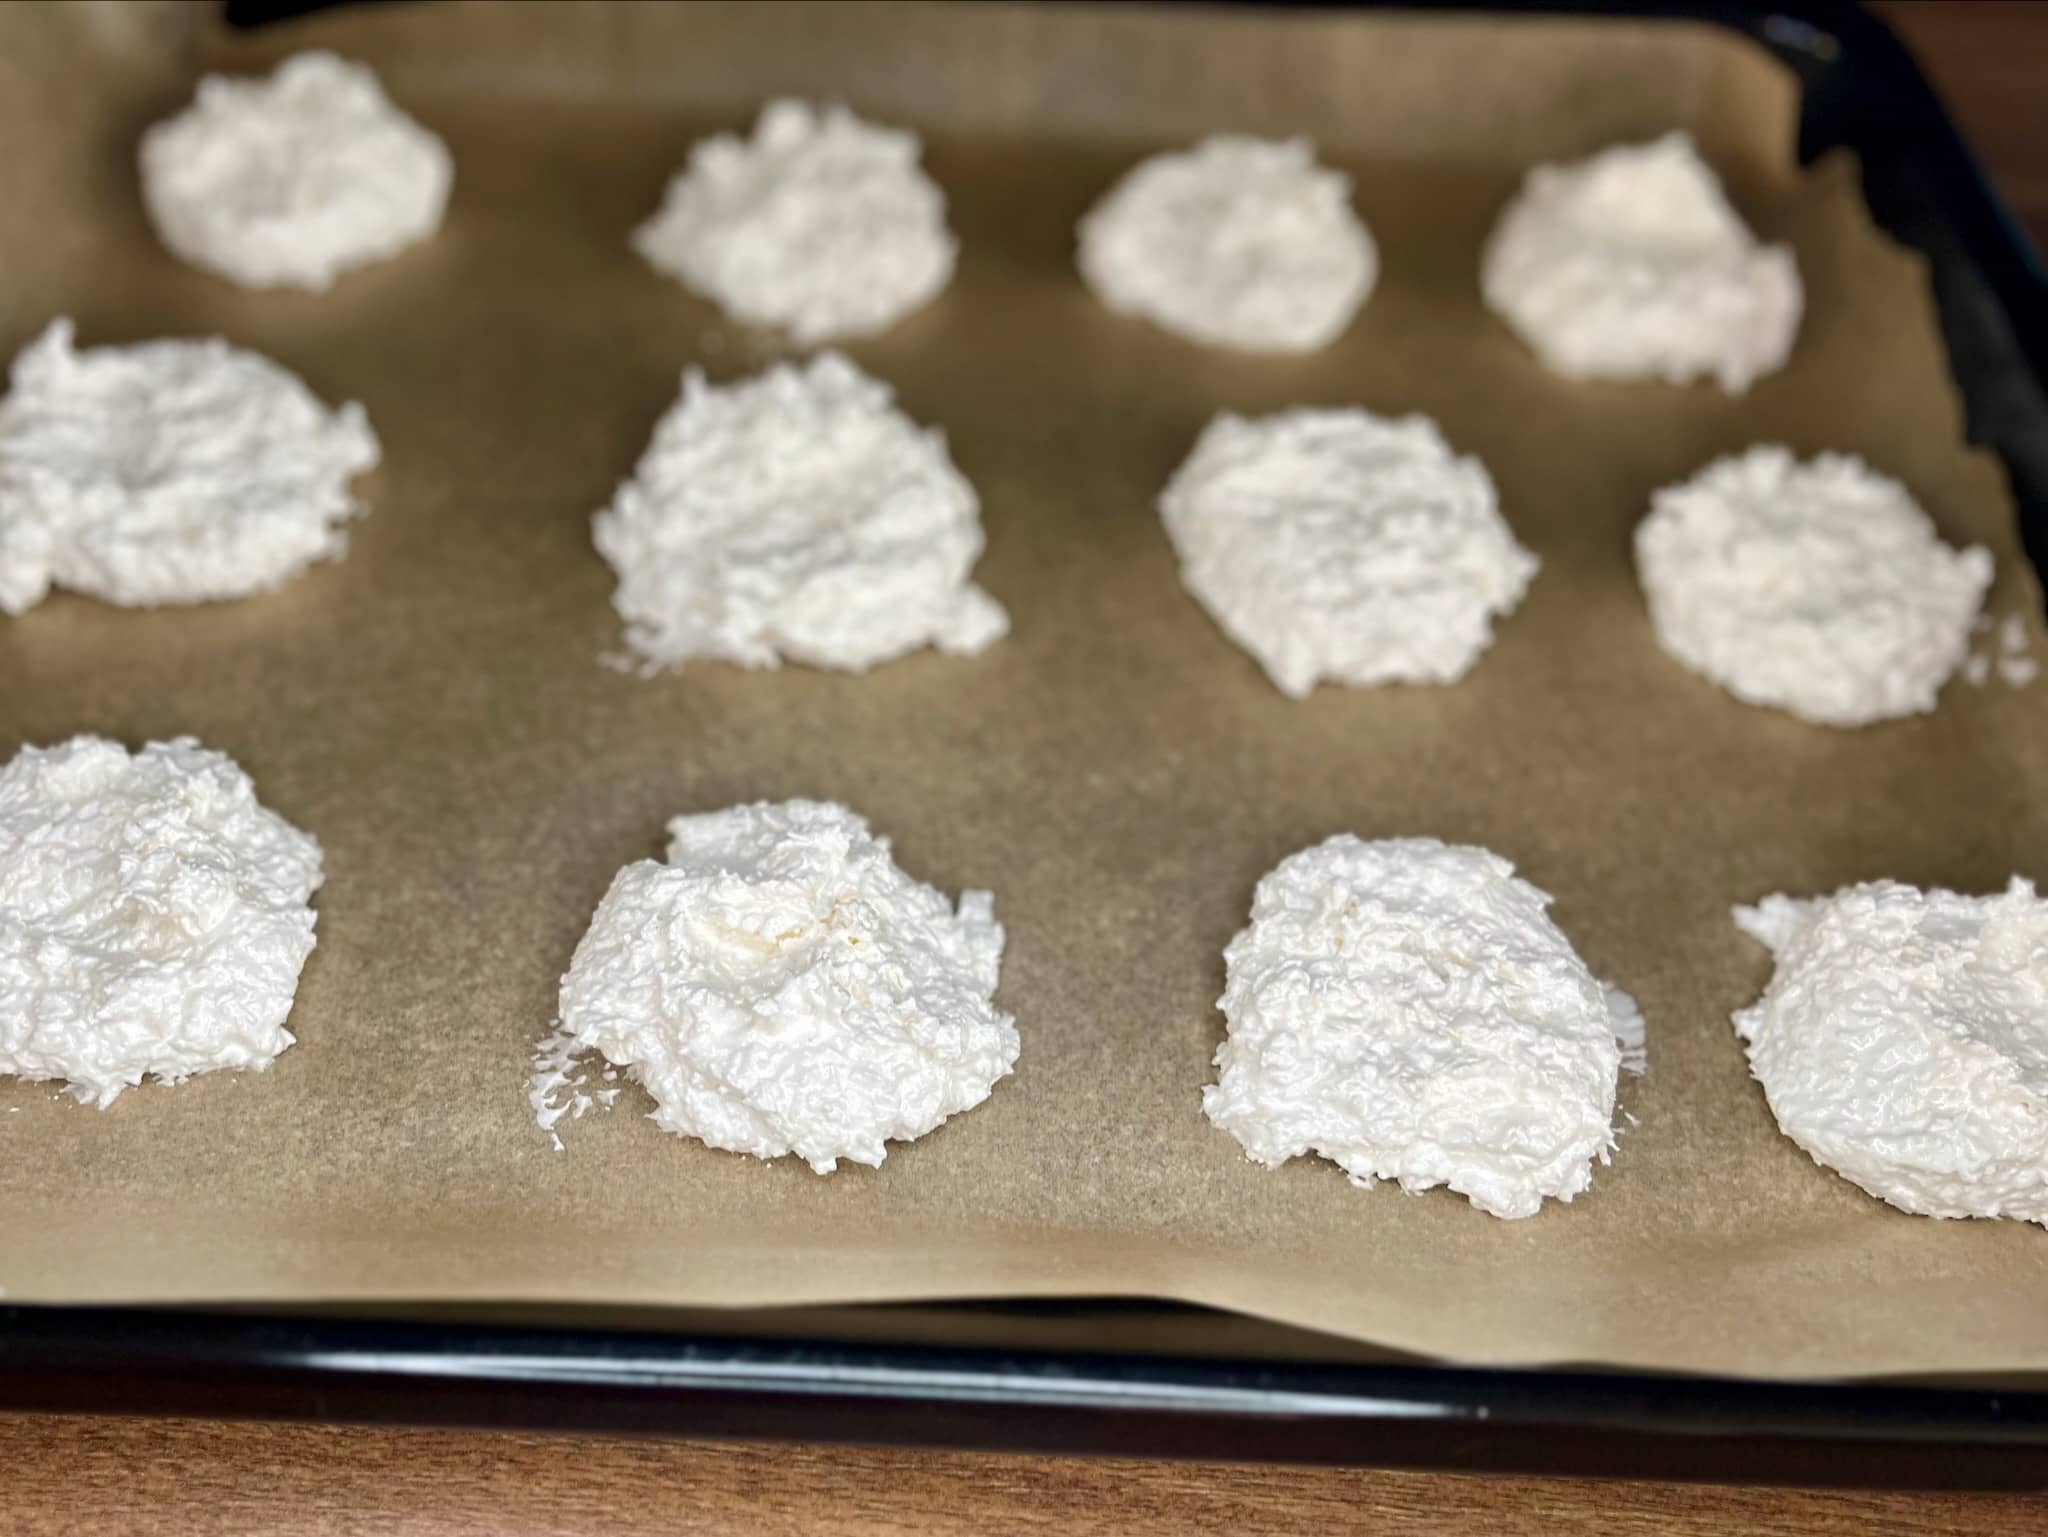 Coconut meringue cookies on a baking sheet, ready to bake